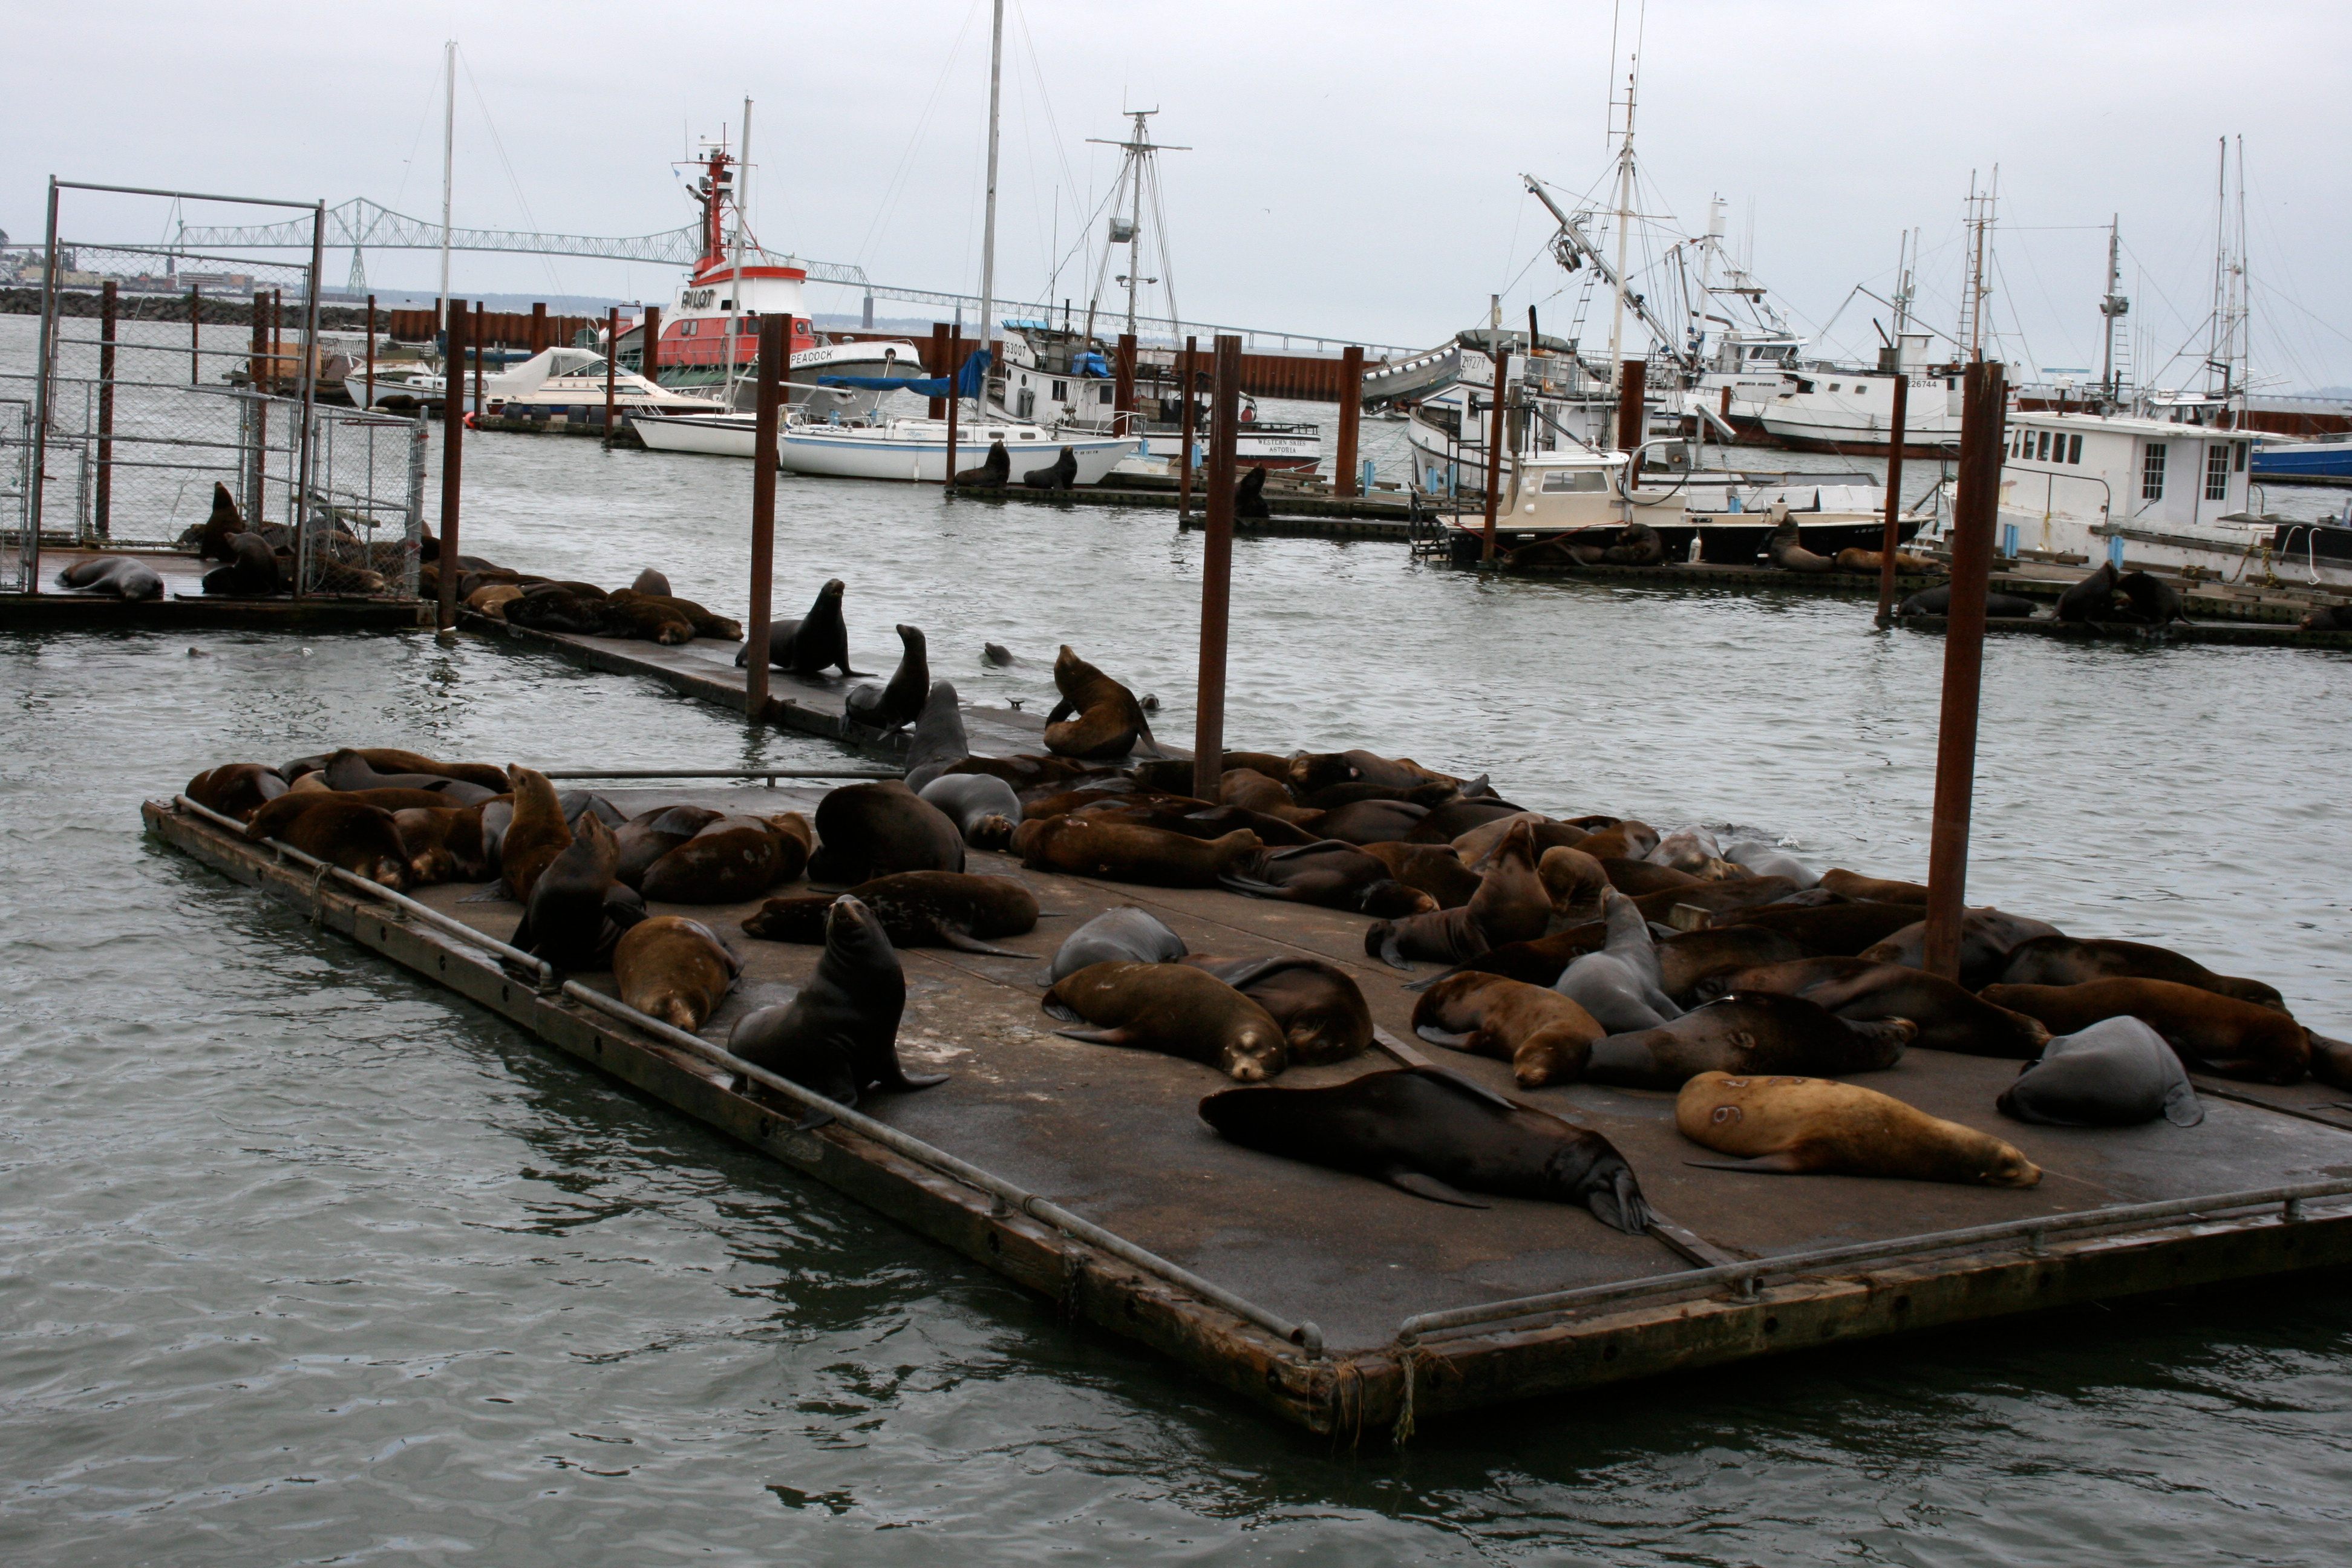 Sea Lions all over the docks with boats and the Astoria Megler bridge in the background